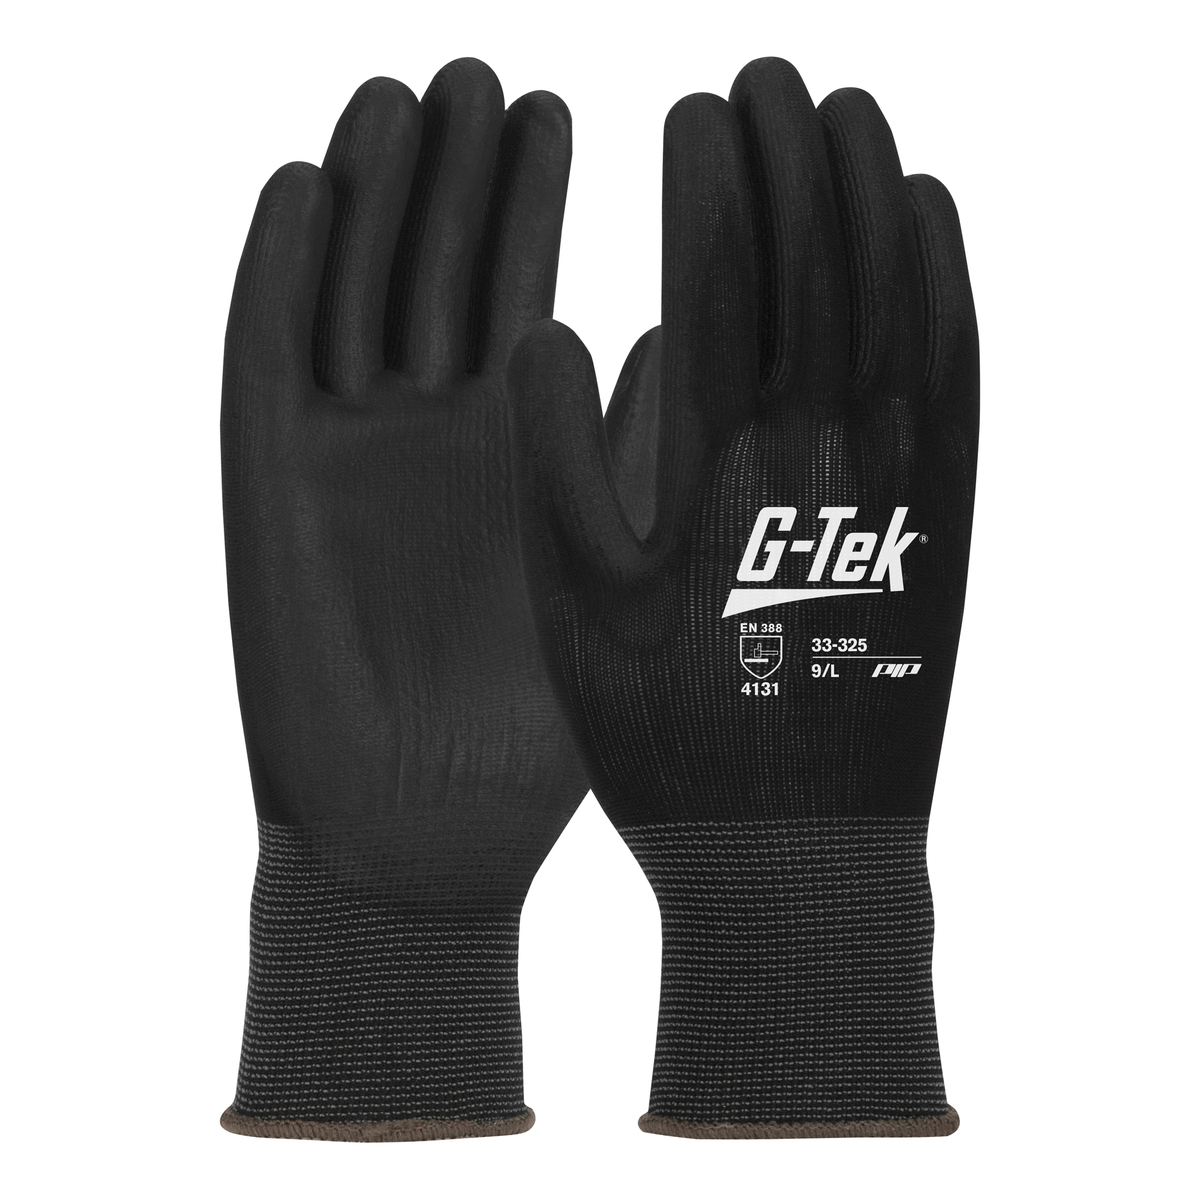 PIP® Large G-Tek® 13 Gauge Black Polyurethane Palm And Finger Coated Work Gloves With Nylon Liner And Continuous Knit Wrist